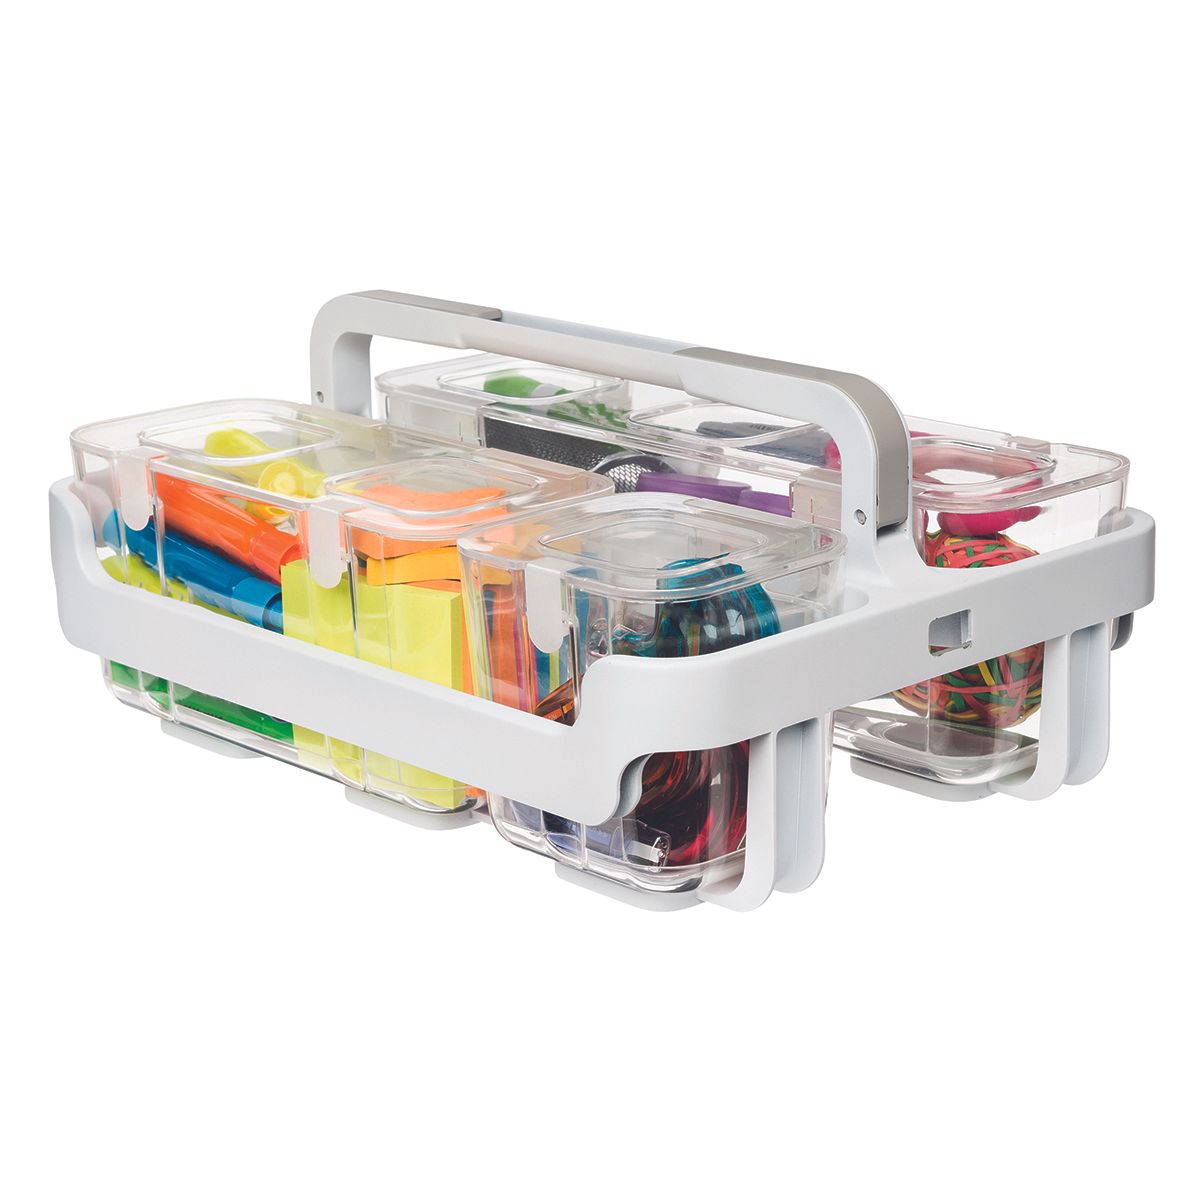 Deflecto Caddy Organizer Frame & 3 Bins | The Container Store